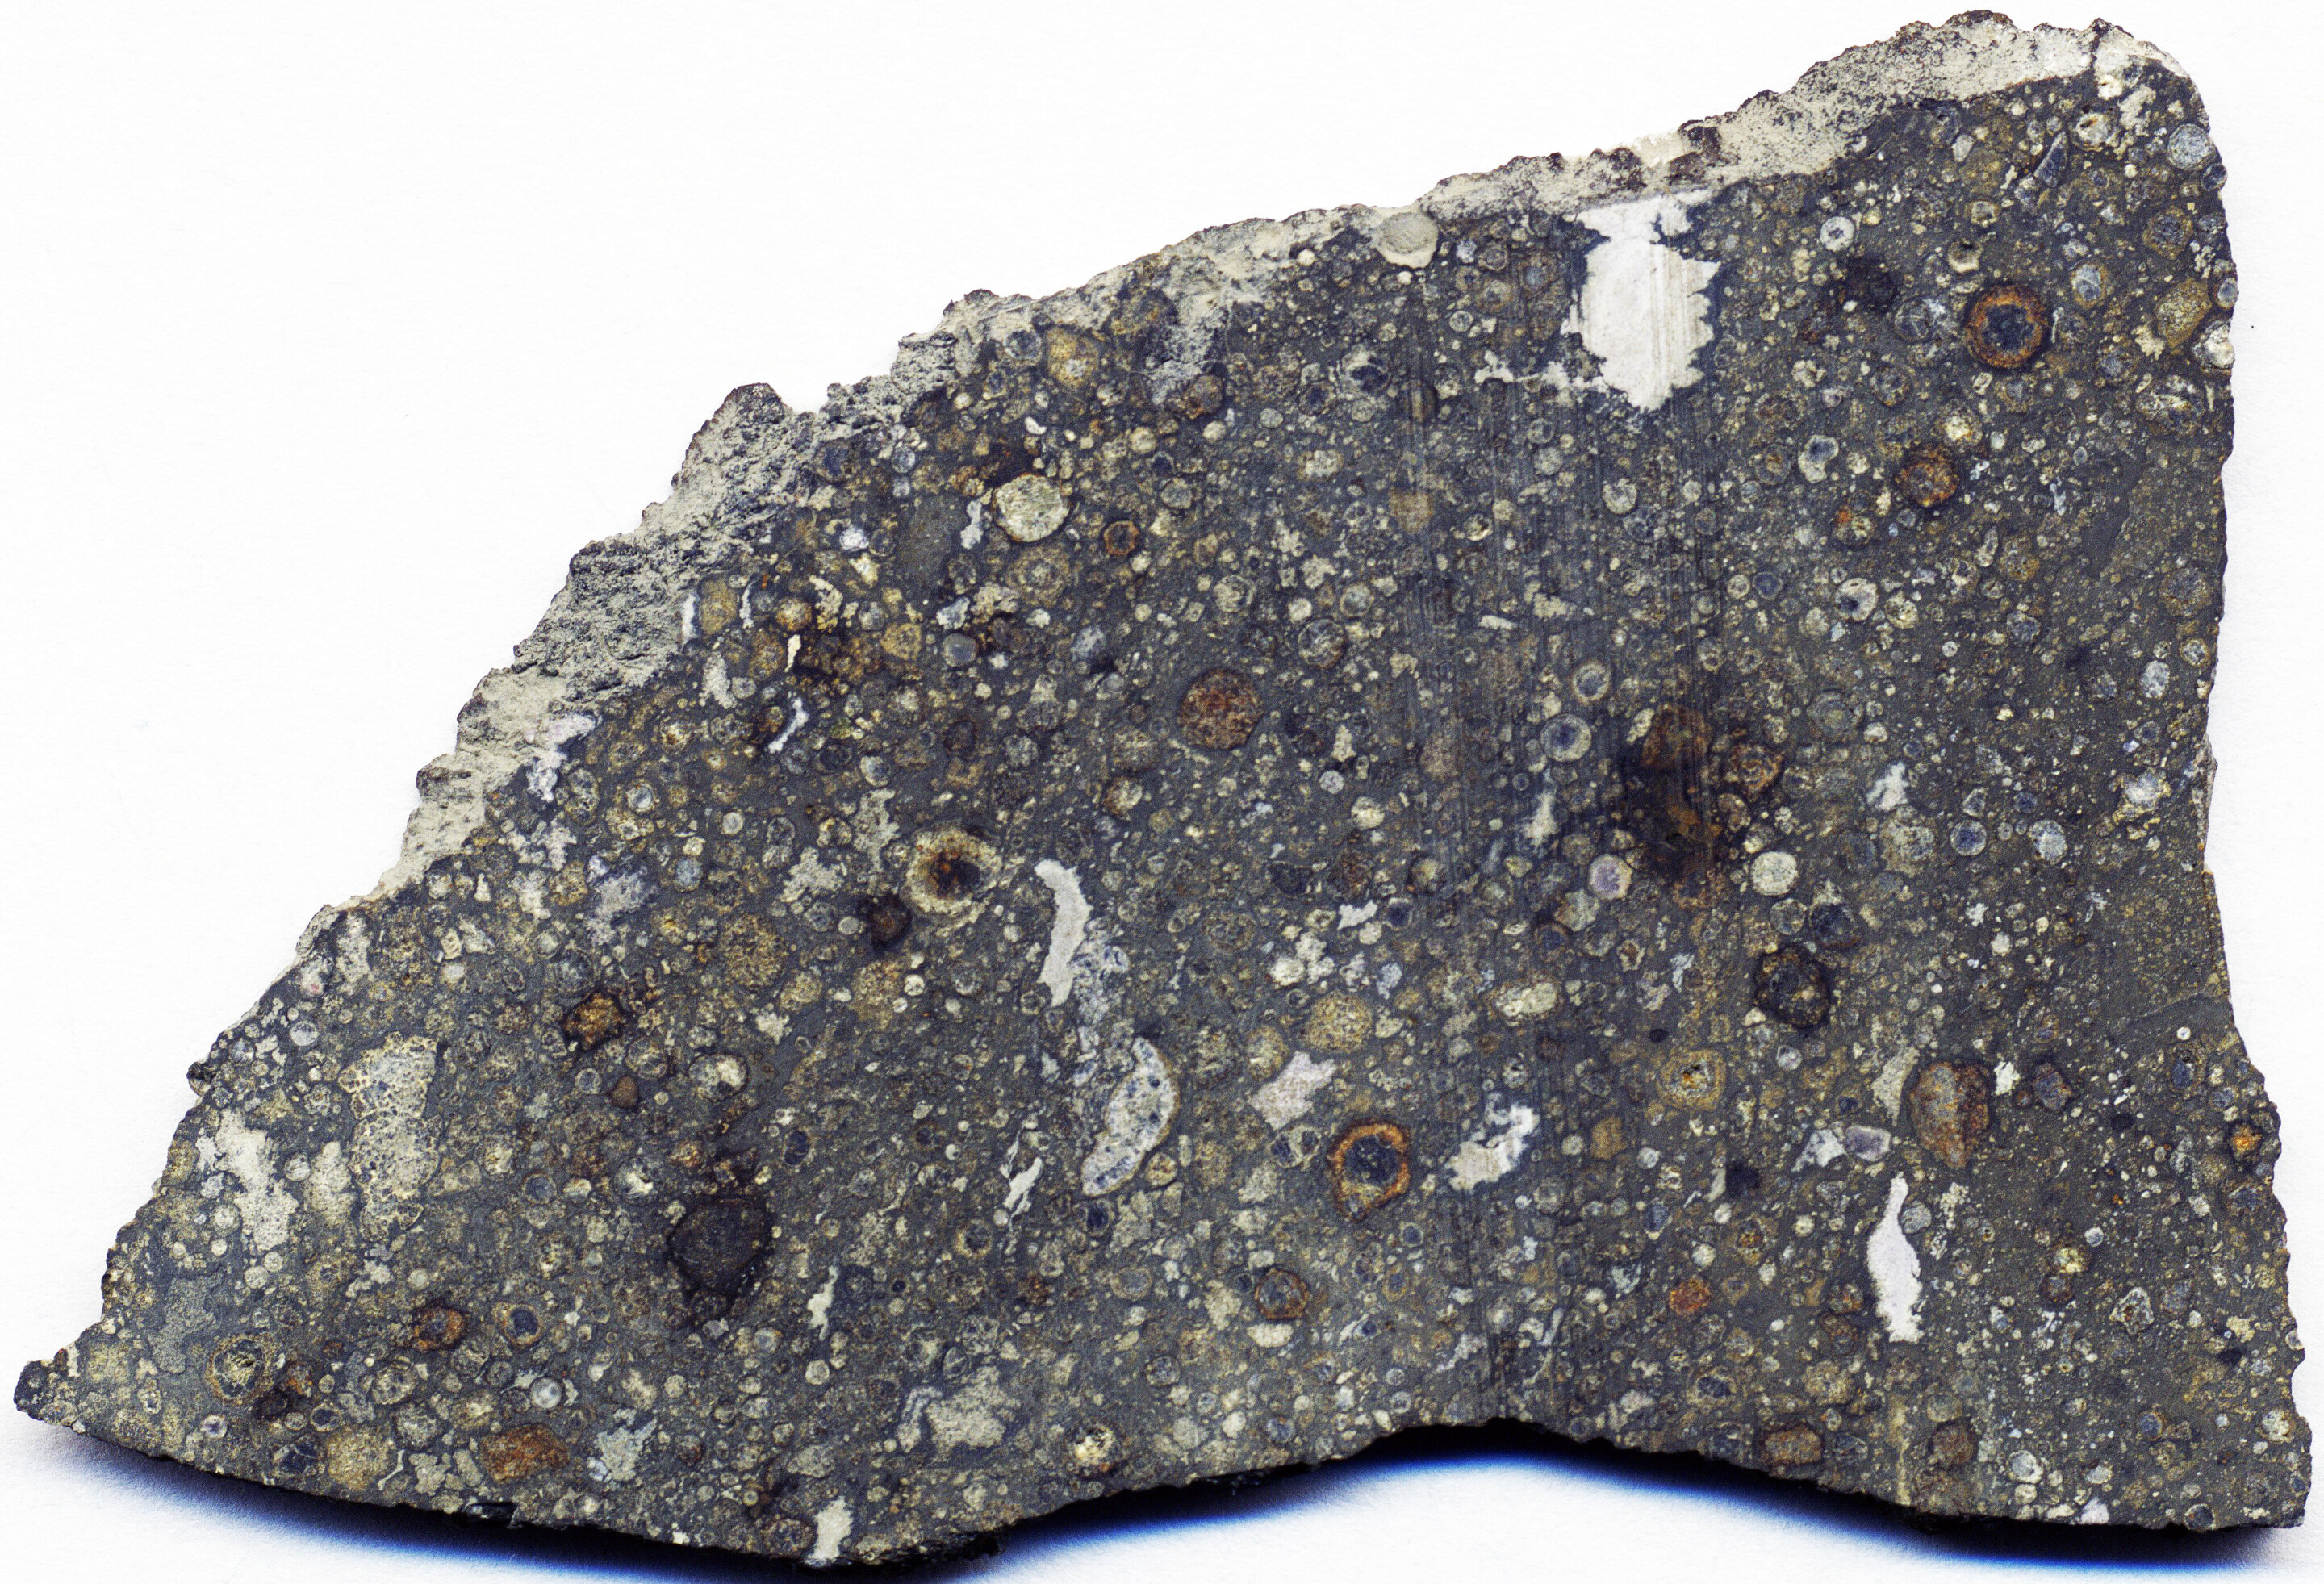 Beads of glass in meteorites help scientists piece together how solar system for..